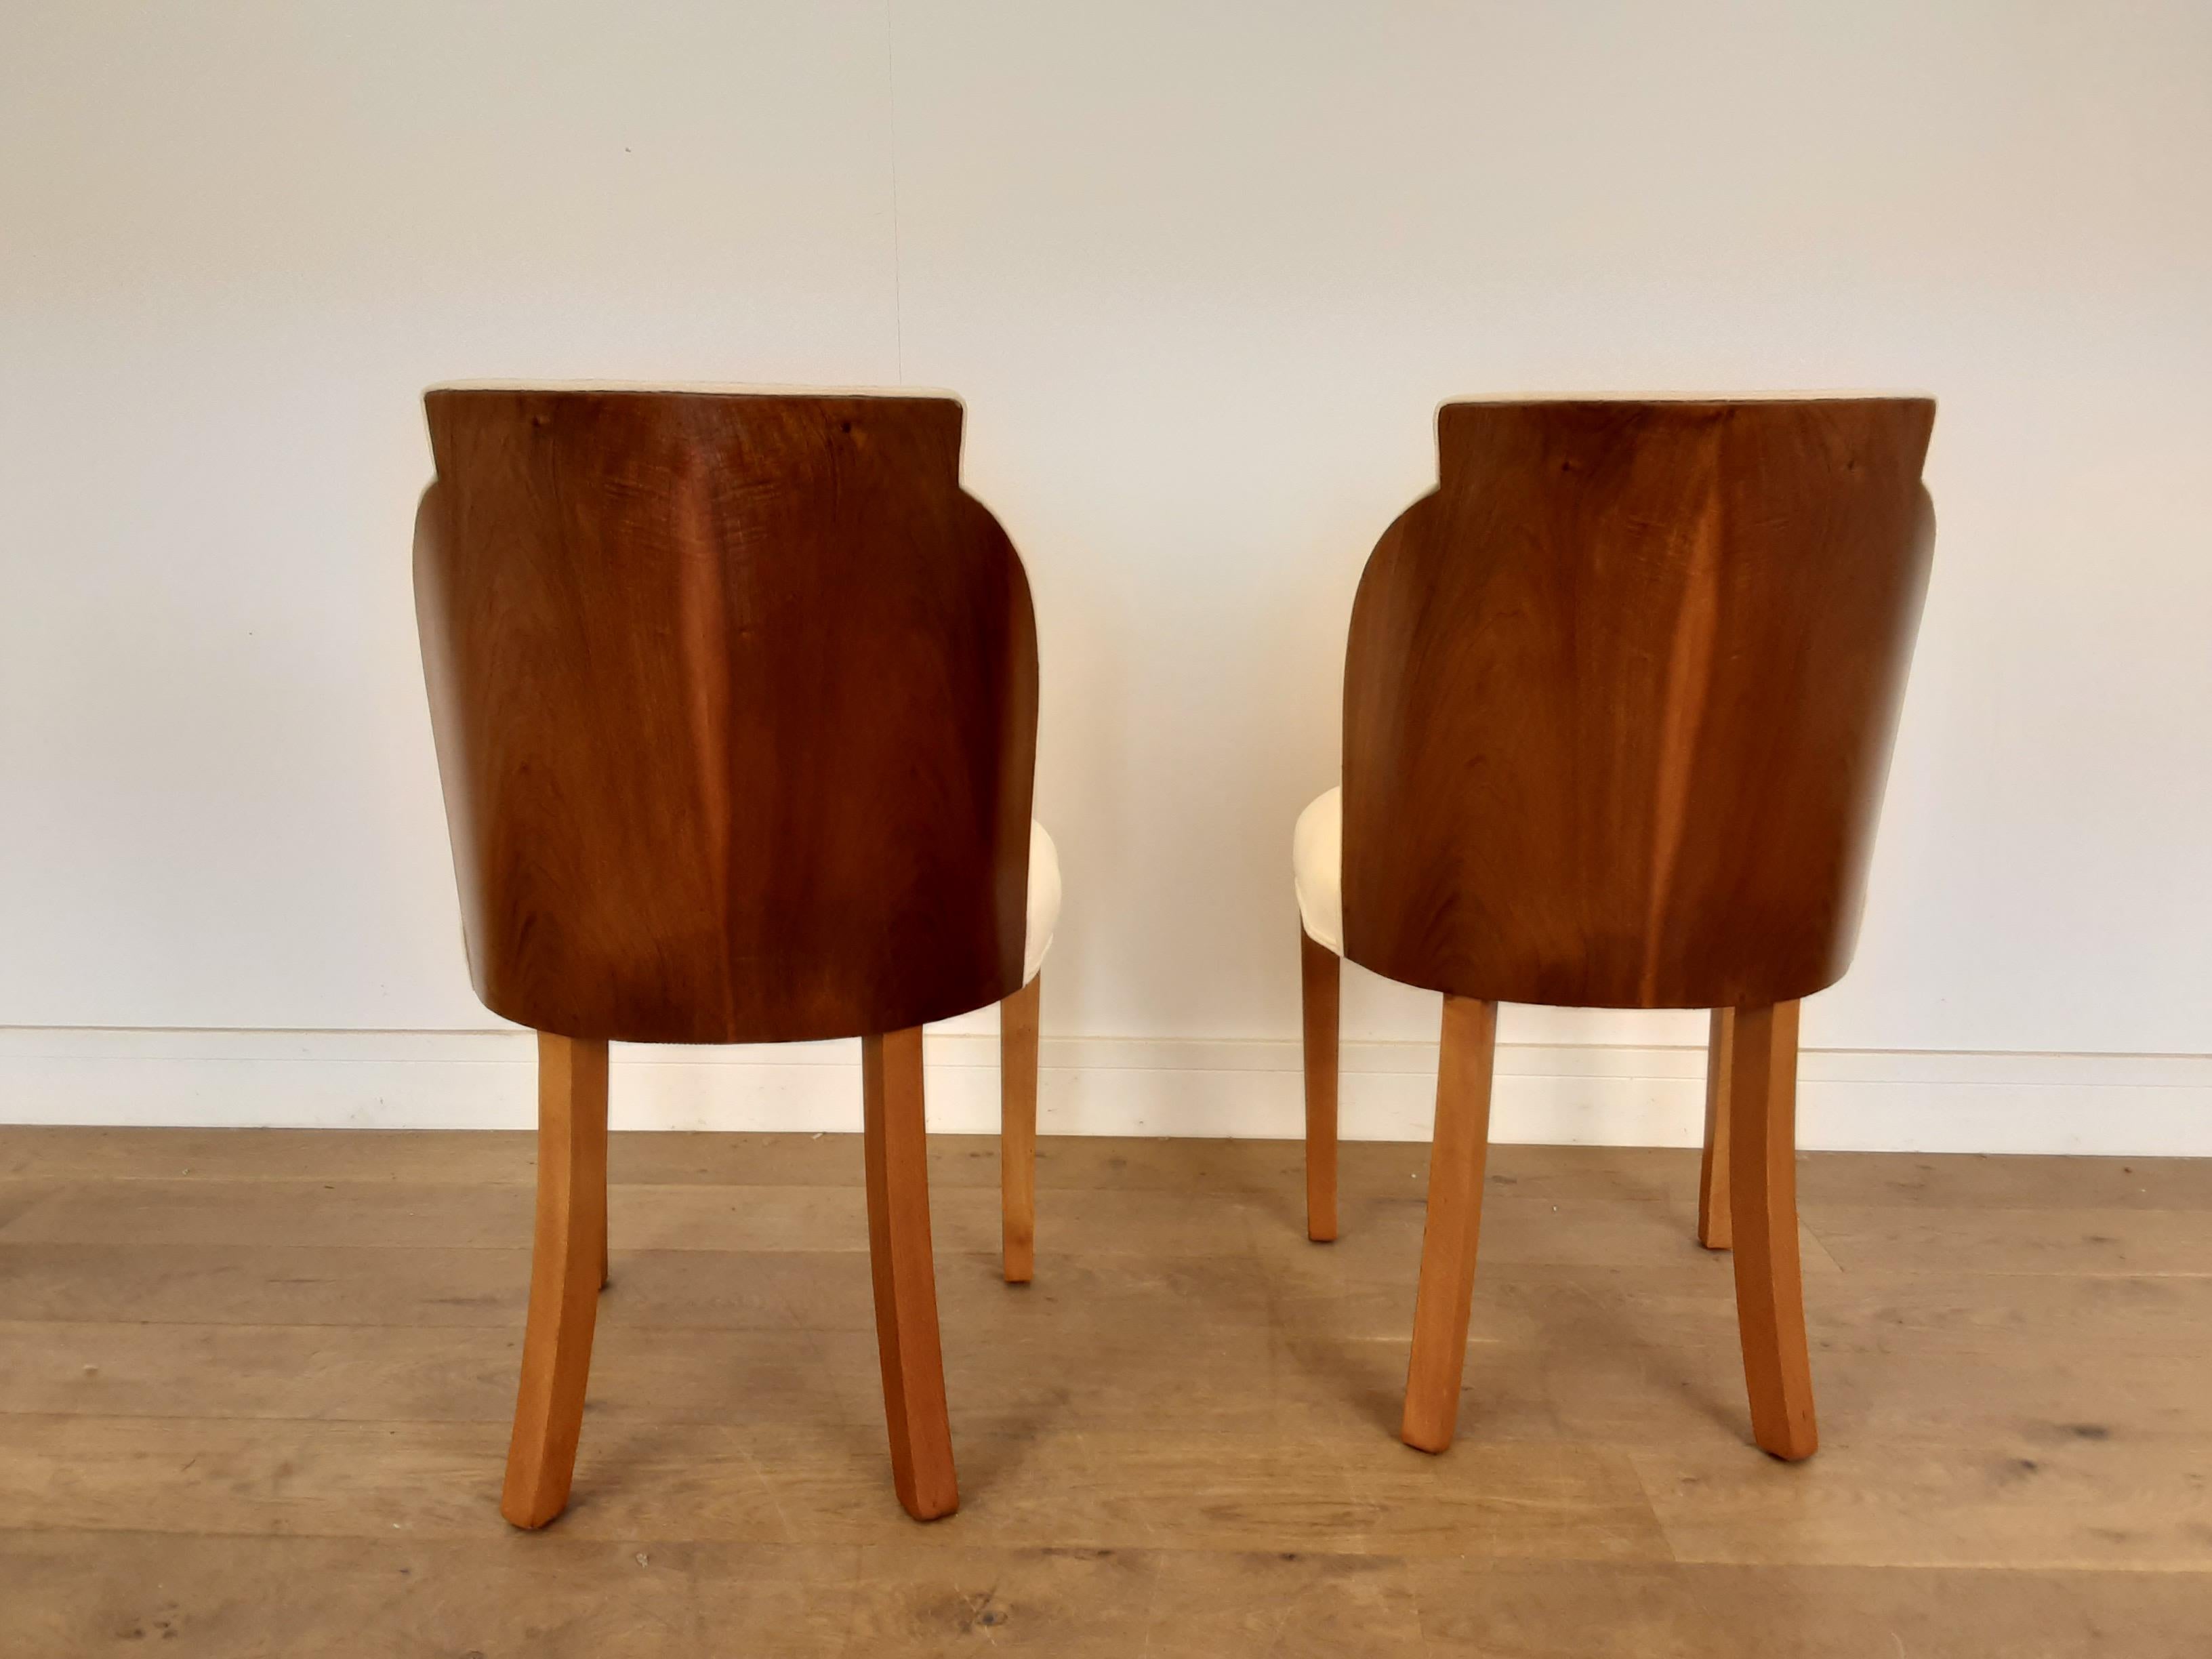 Pair of Art Deco Cloud Back Chairs in Walnut by Epstein, circa 1930 For Sale 2